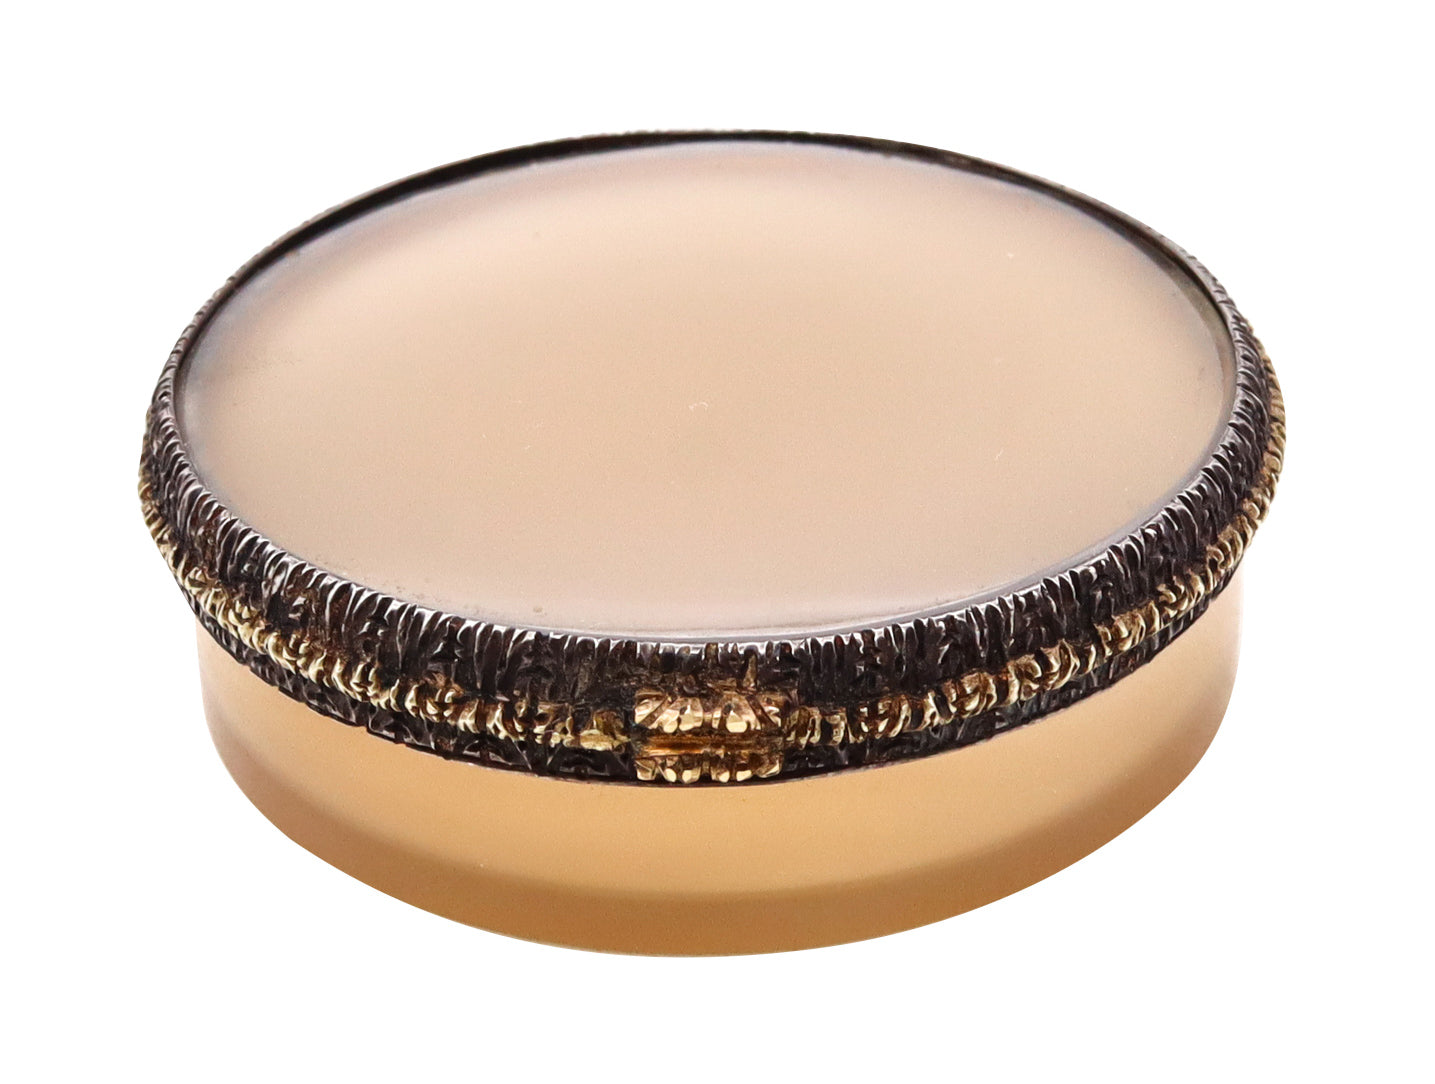 French 1790 Antique Snuffbox In 19Kt Gold And Sterling With Translucent Gray Agate